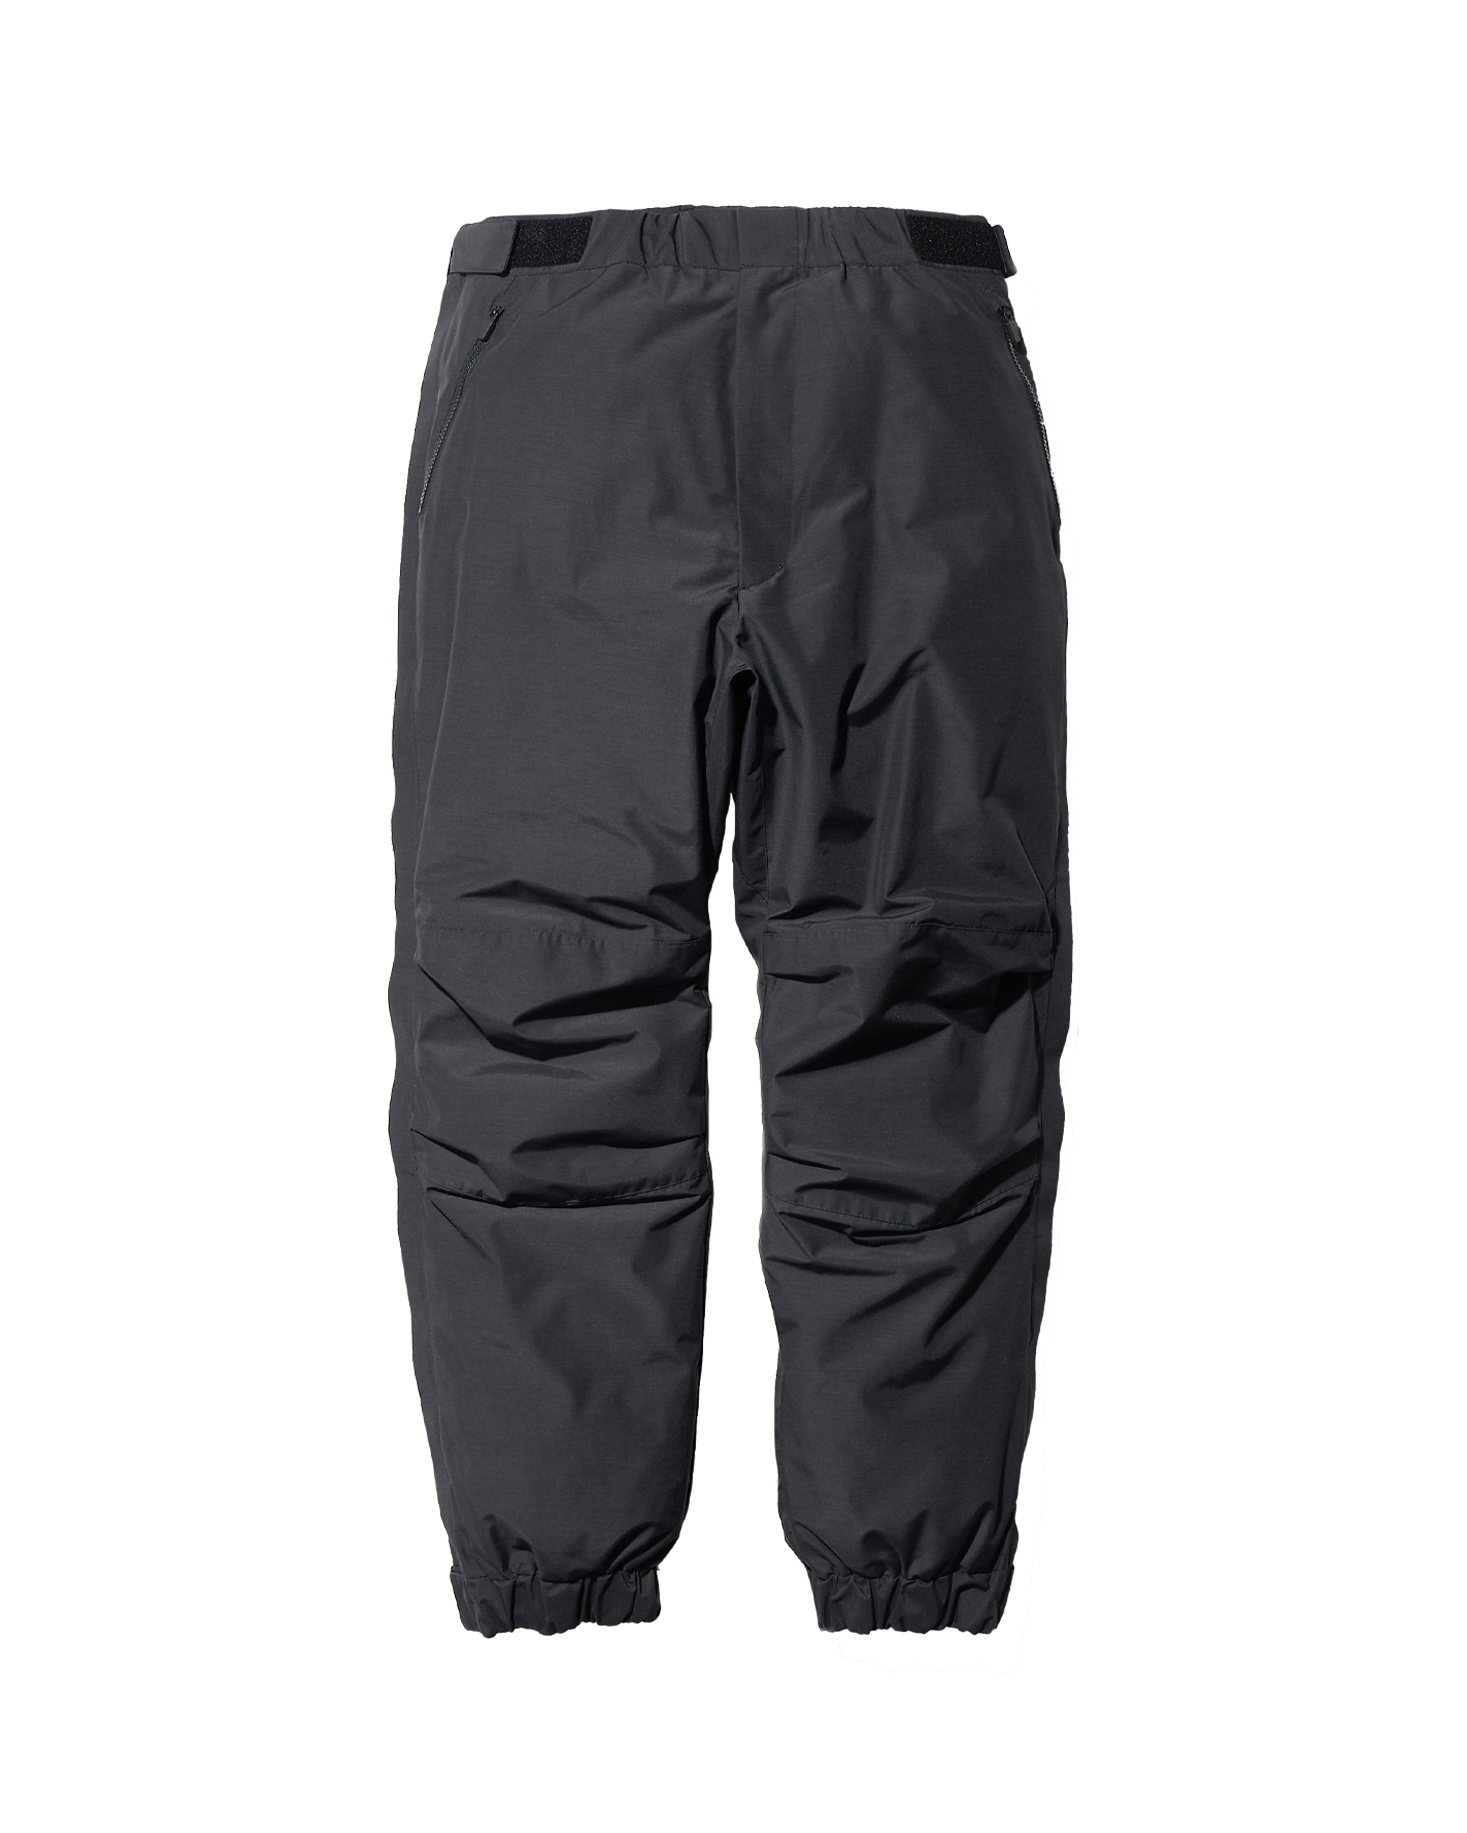 Fire-Resistant 2 Layer Down Pants